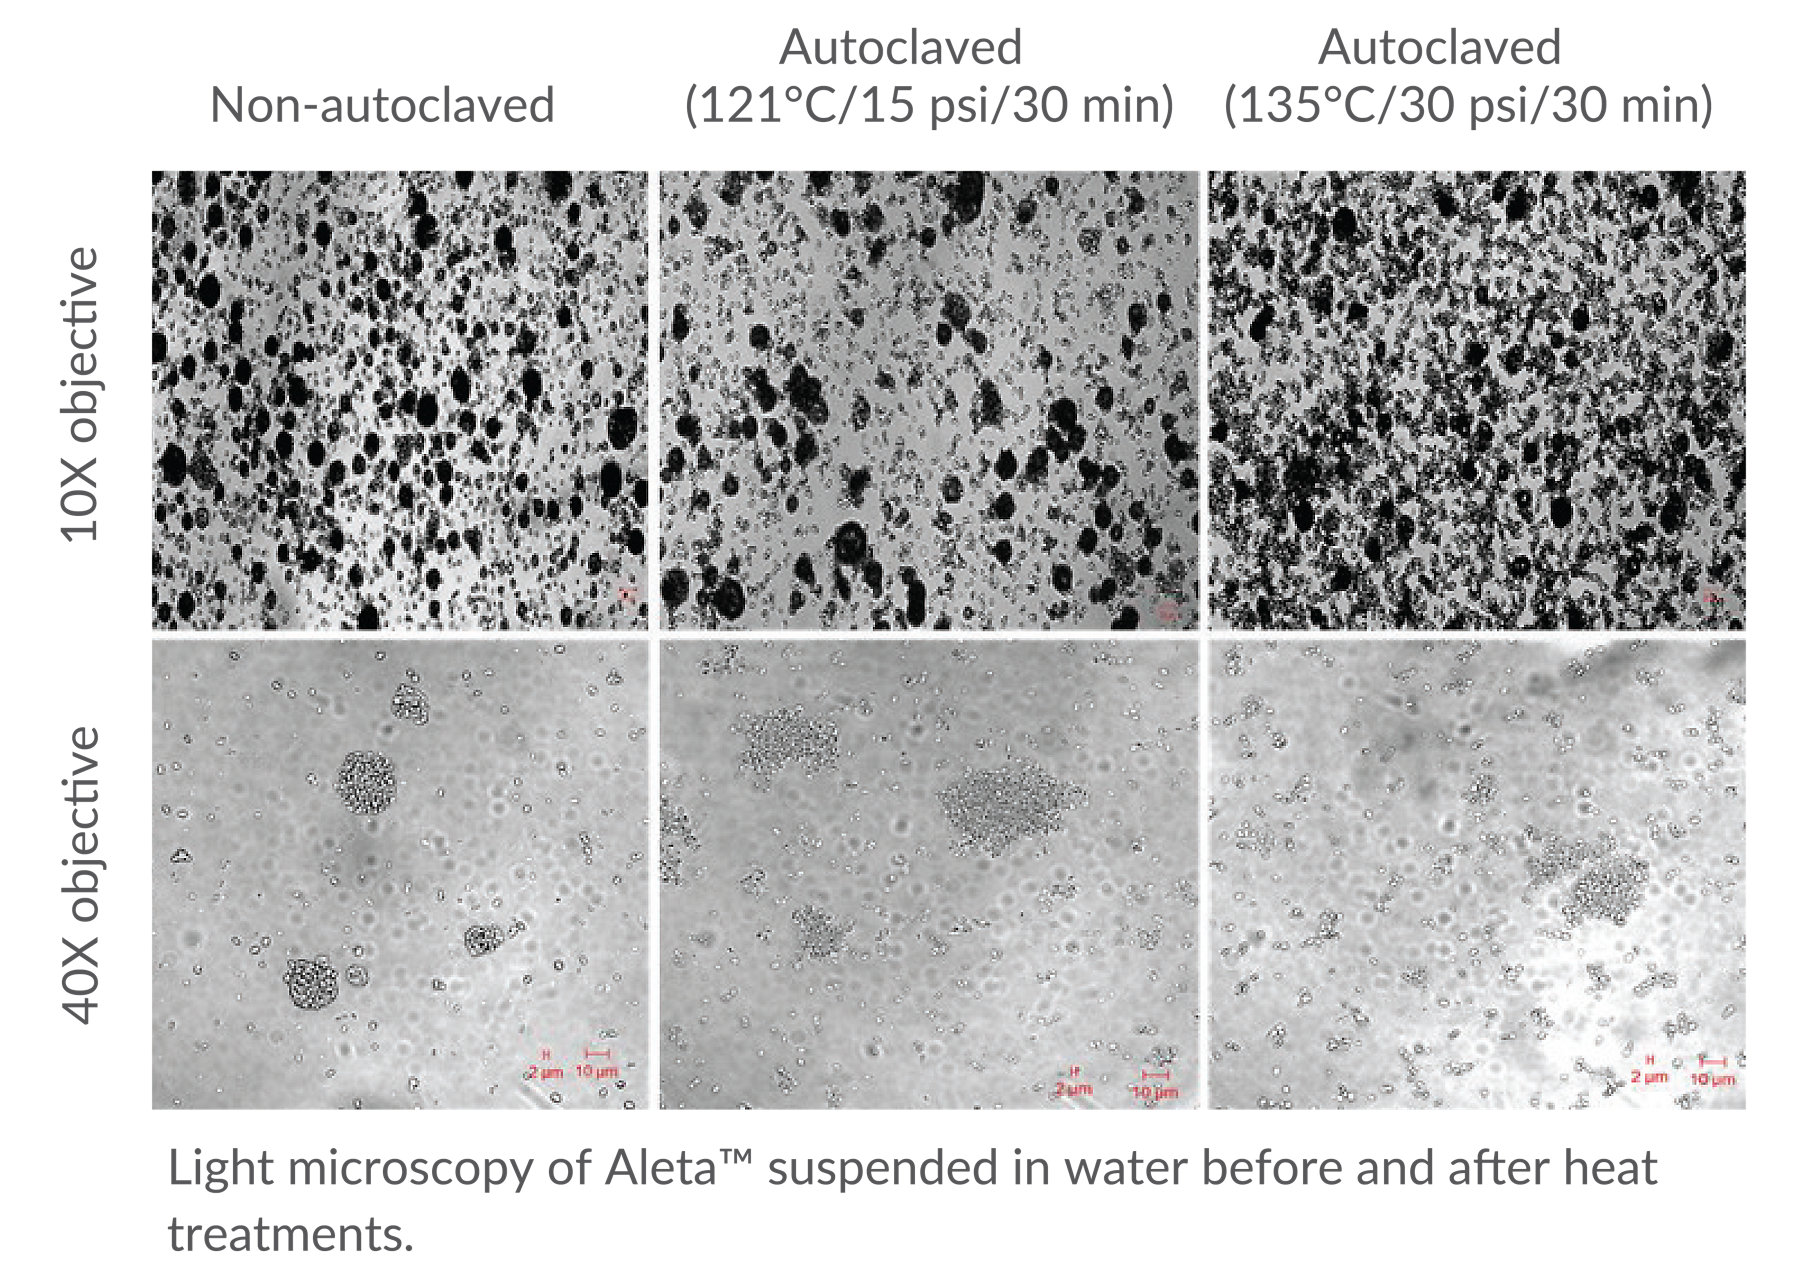 KAA Aleta light microscopy suspended in water reference